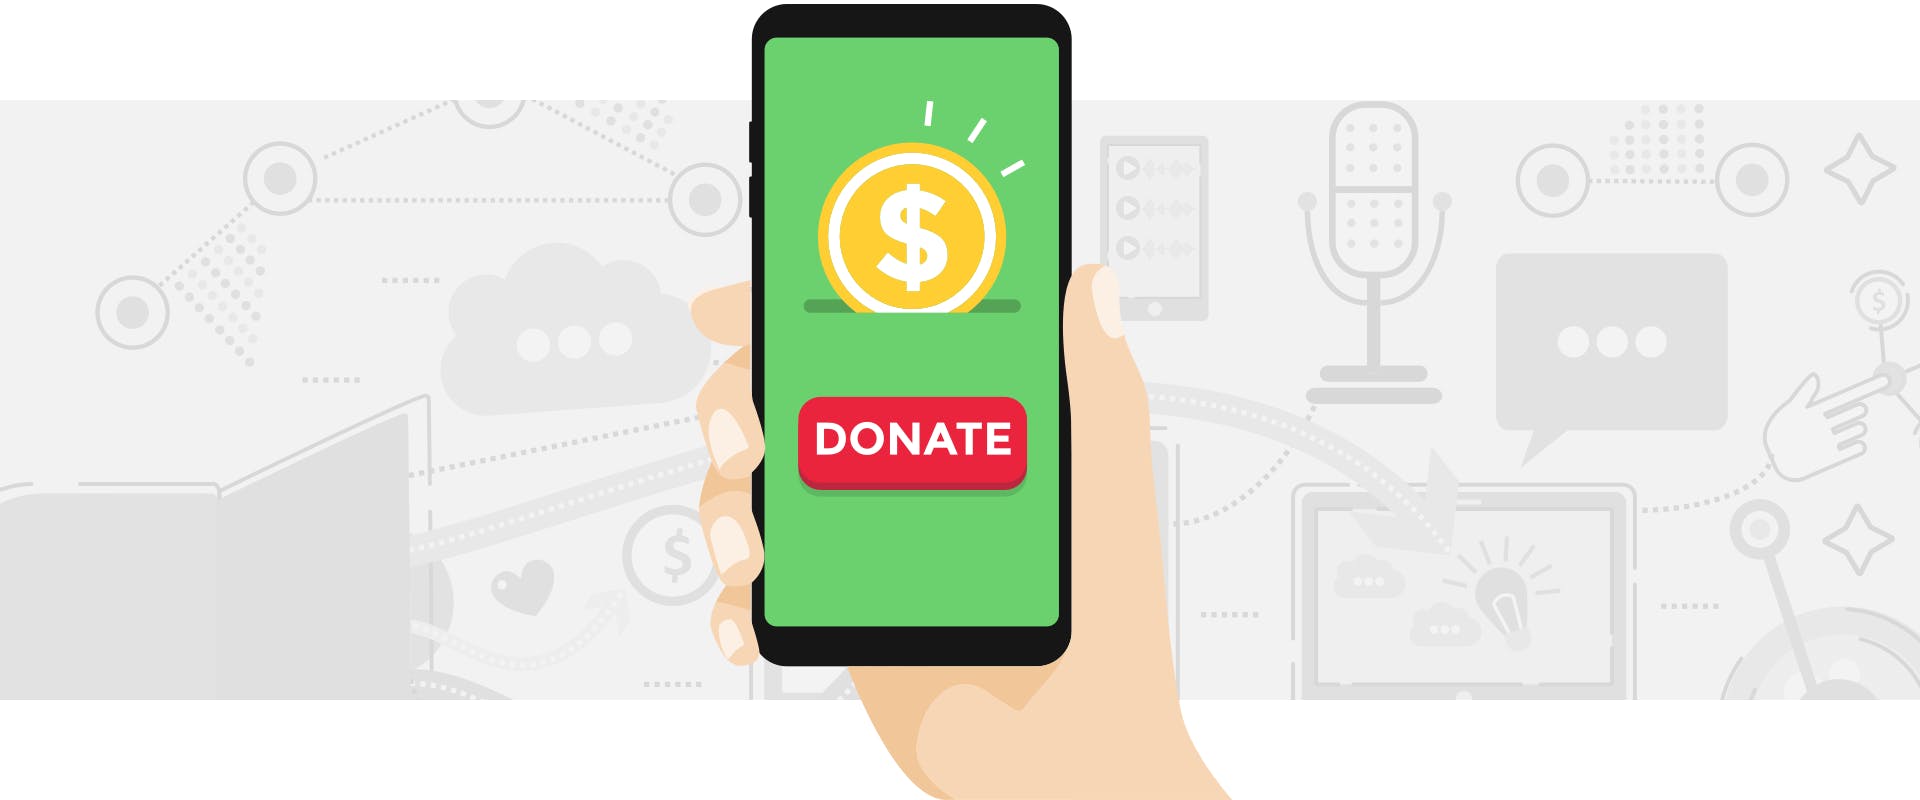 Smartphone with a donation button